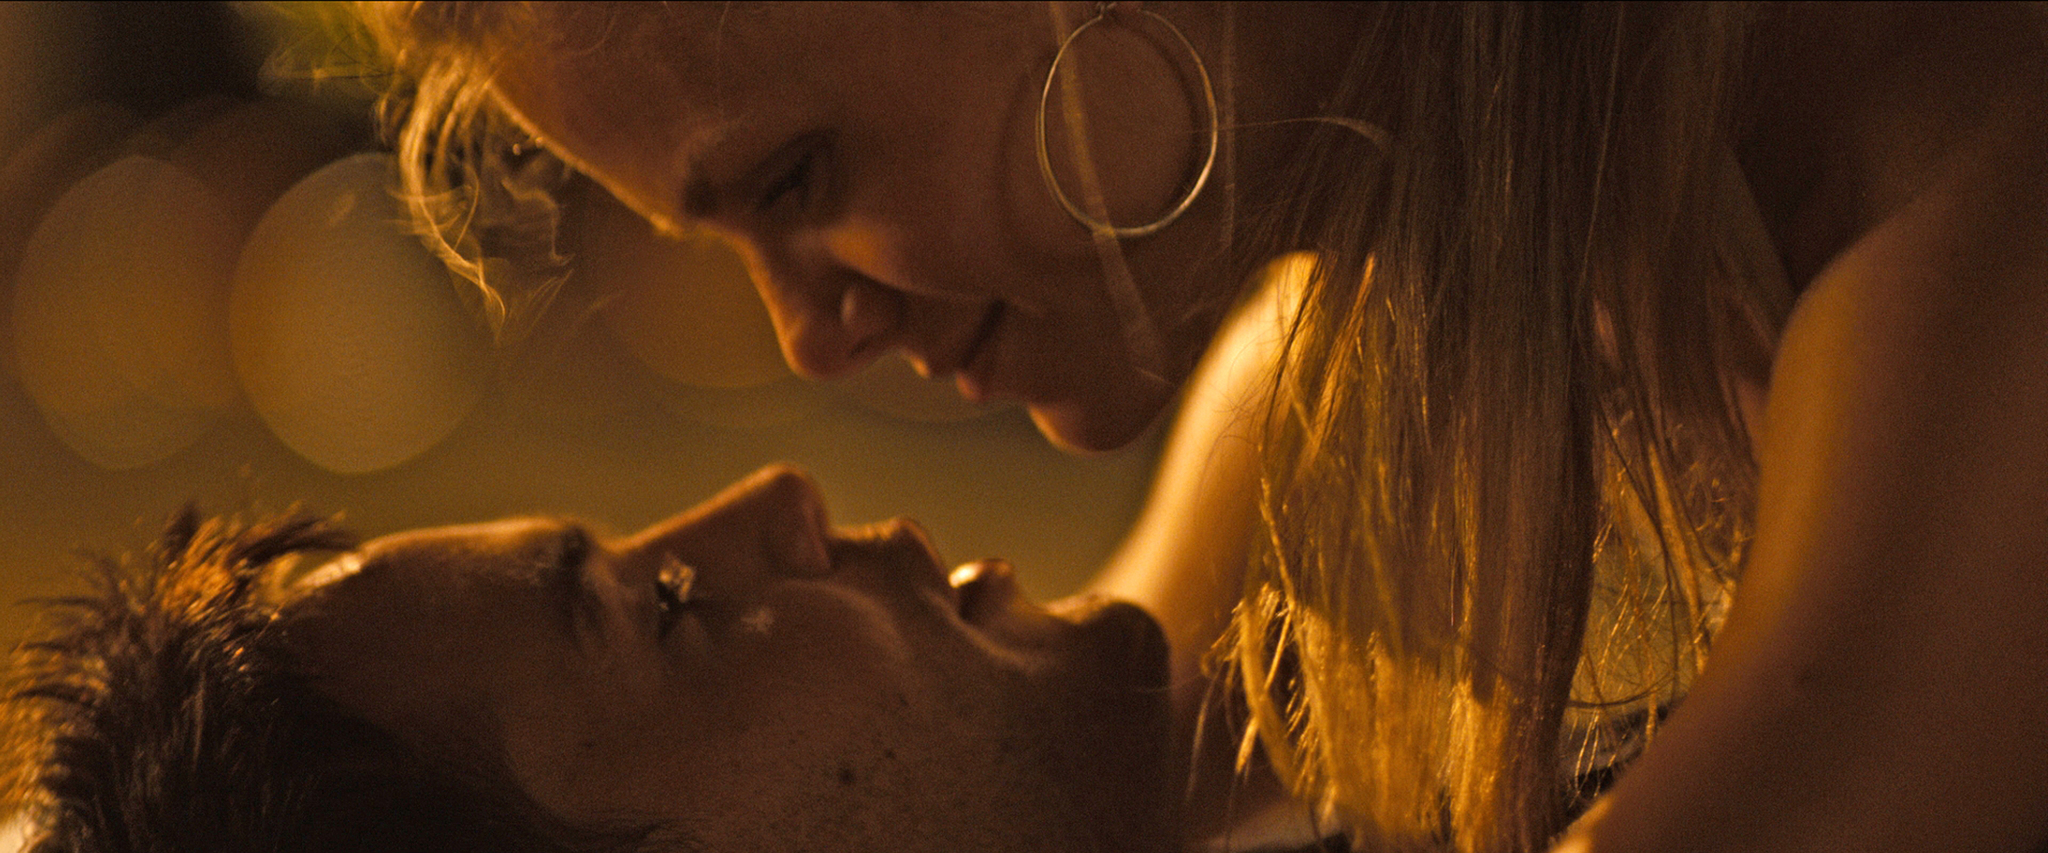 Still of Taylor Kitsch and Brooklyn Decker in Laivu musis (2012)